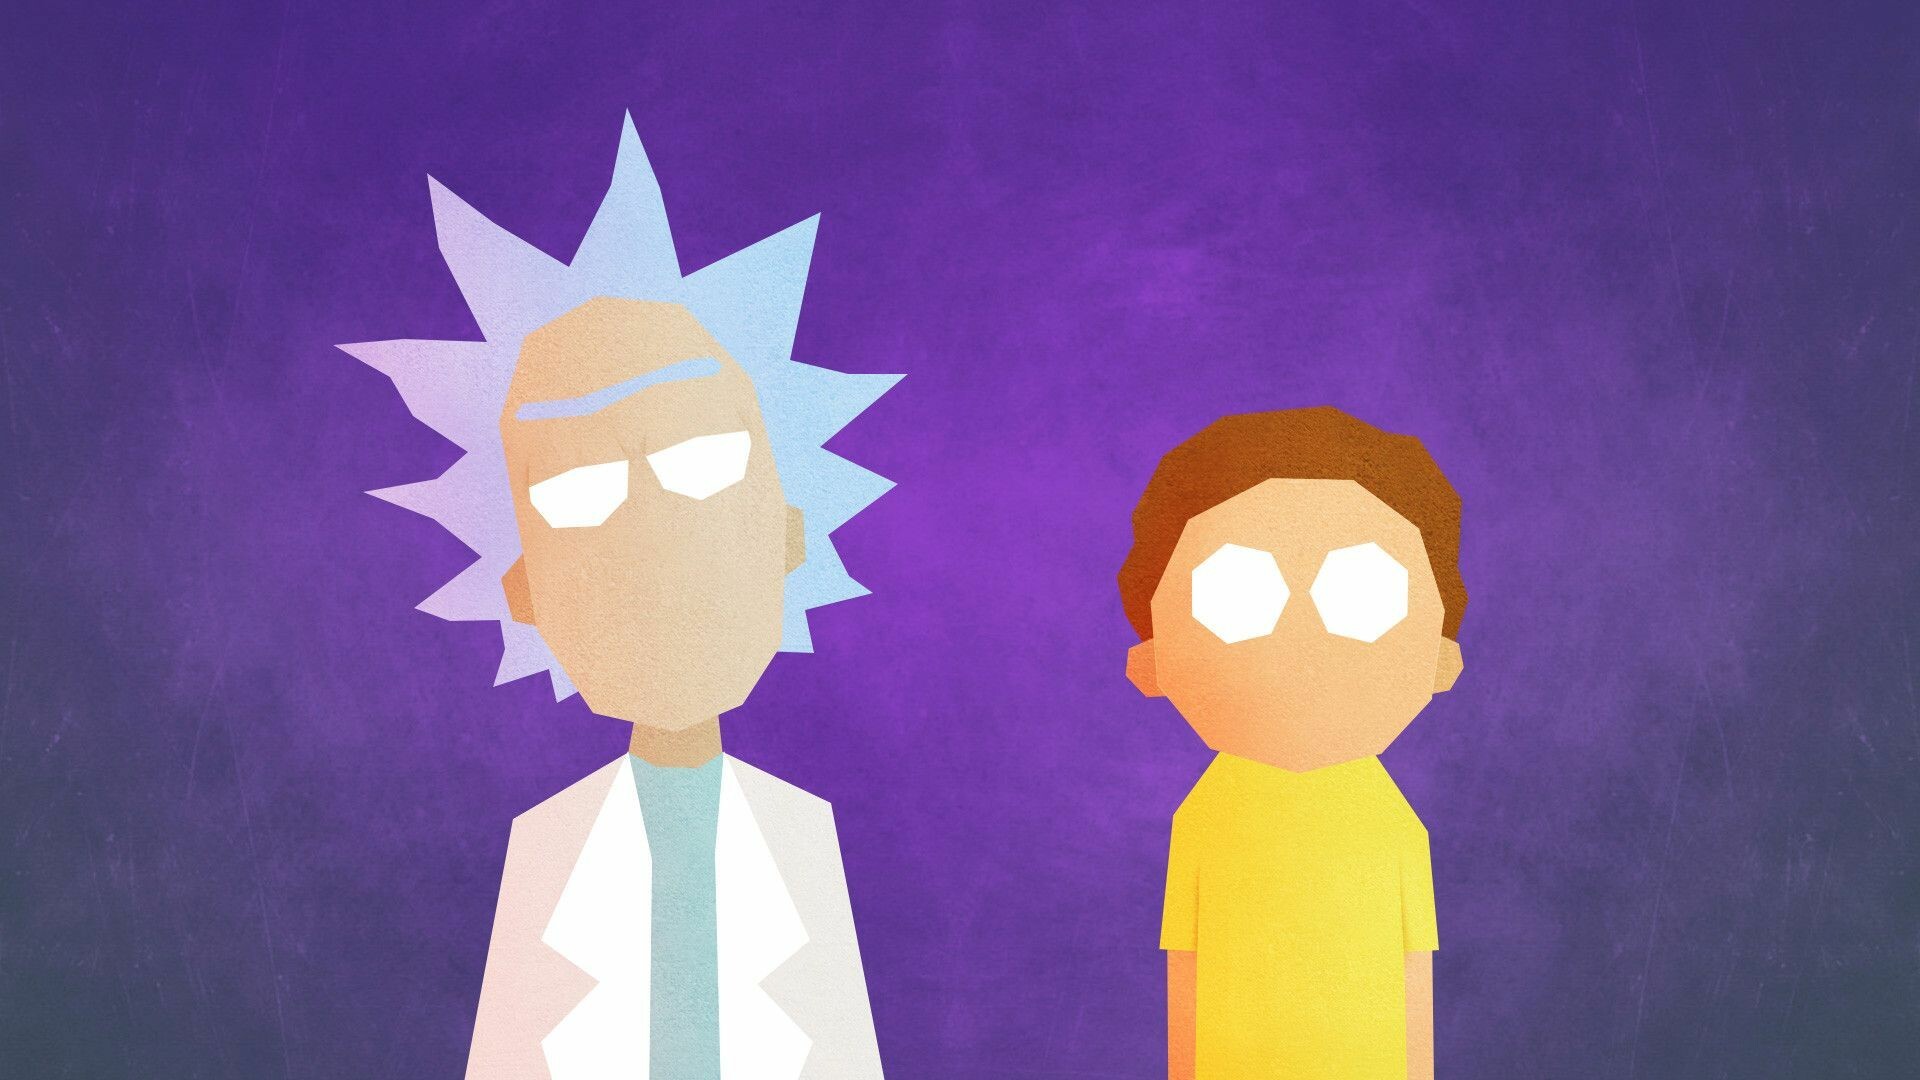 Rick and Morty: Snarky, morally-unsound and alcoholic Mad Scientist grandfather. 1920x1080 Full HD Background.